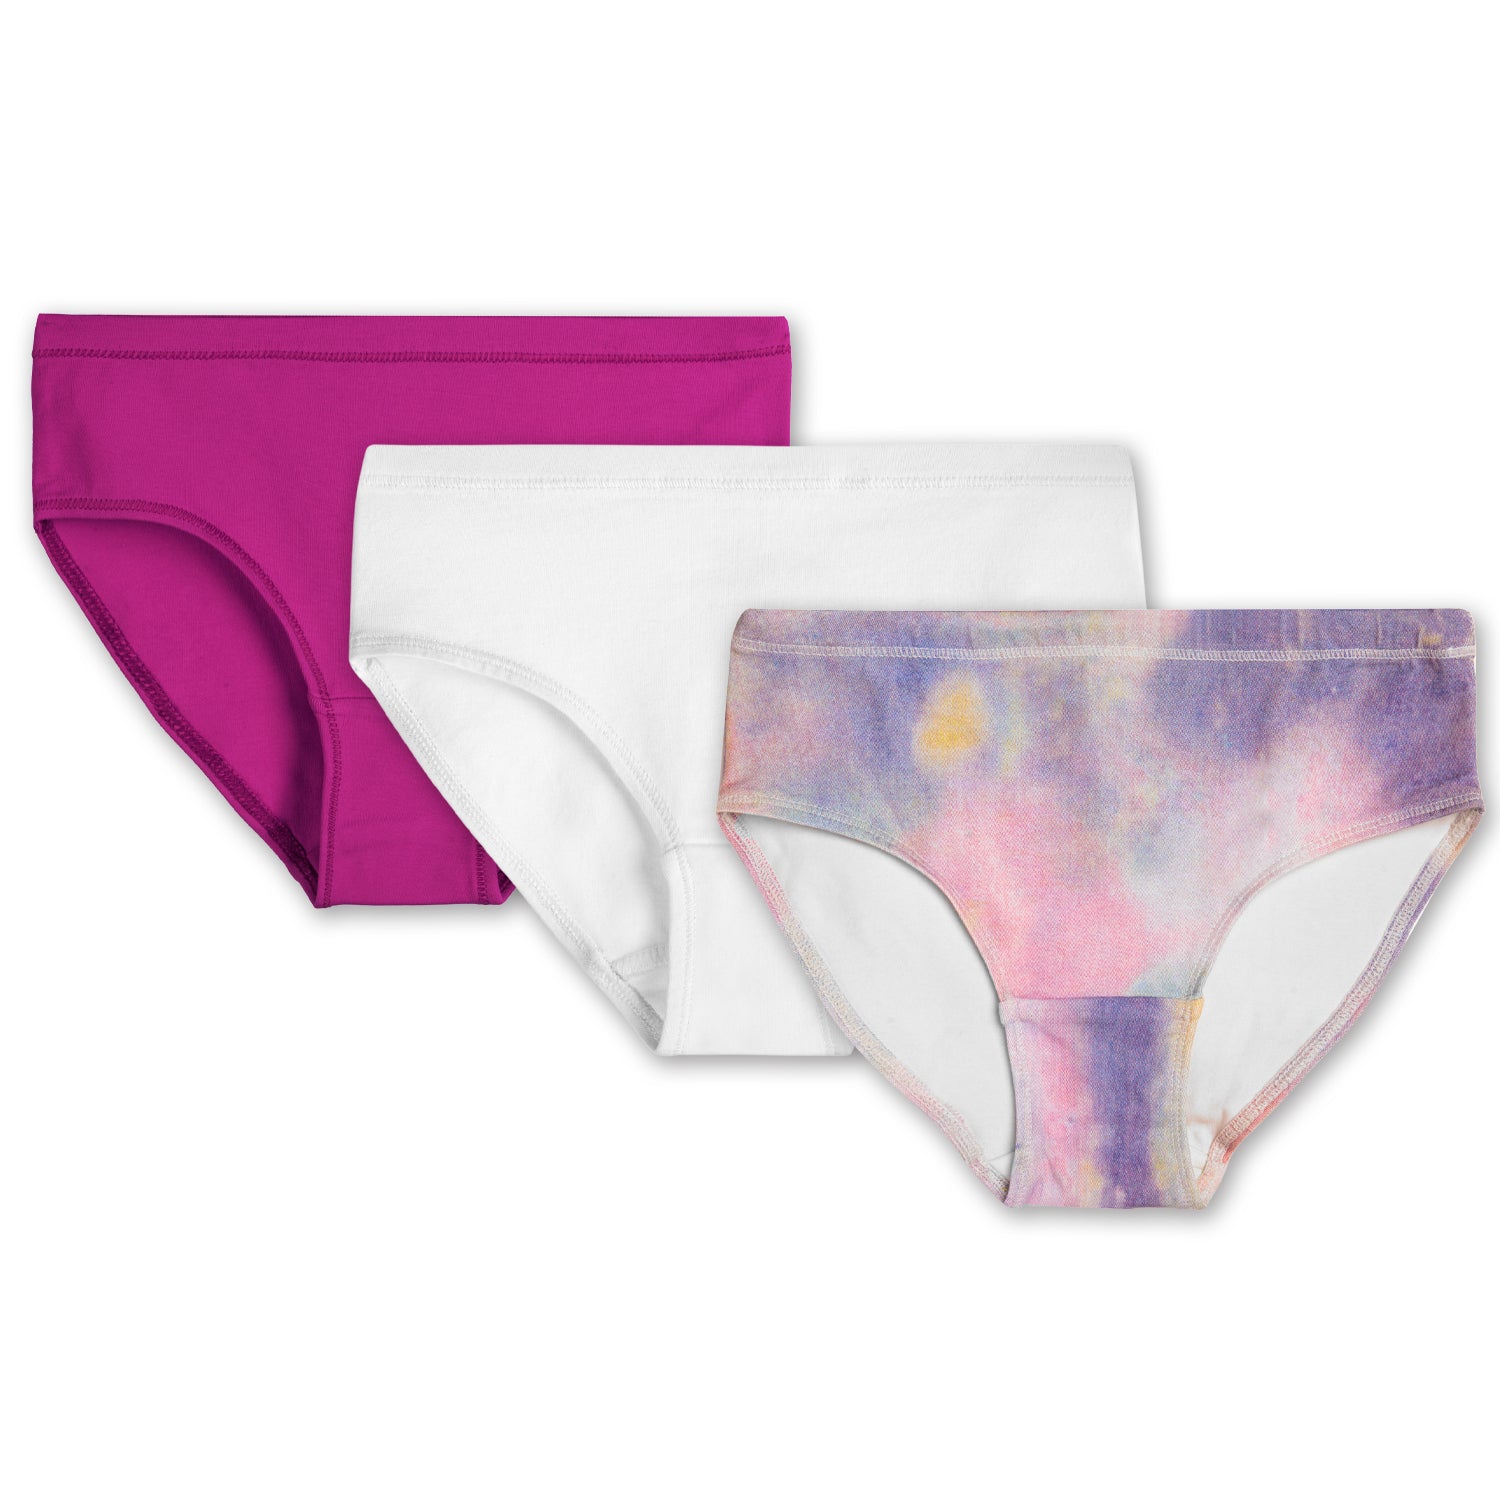 Girl's Hypoallergenic Panty made from 100% Organic Cotton (3/pack